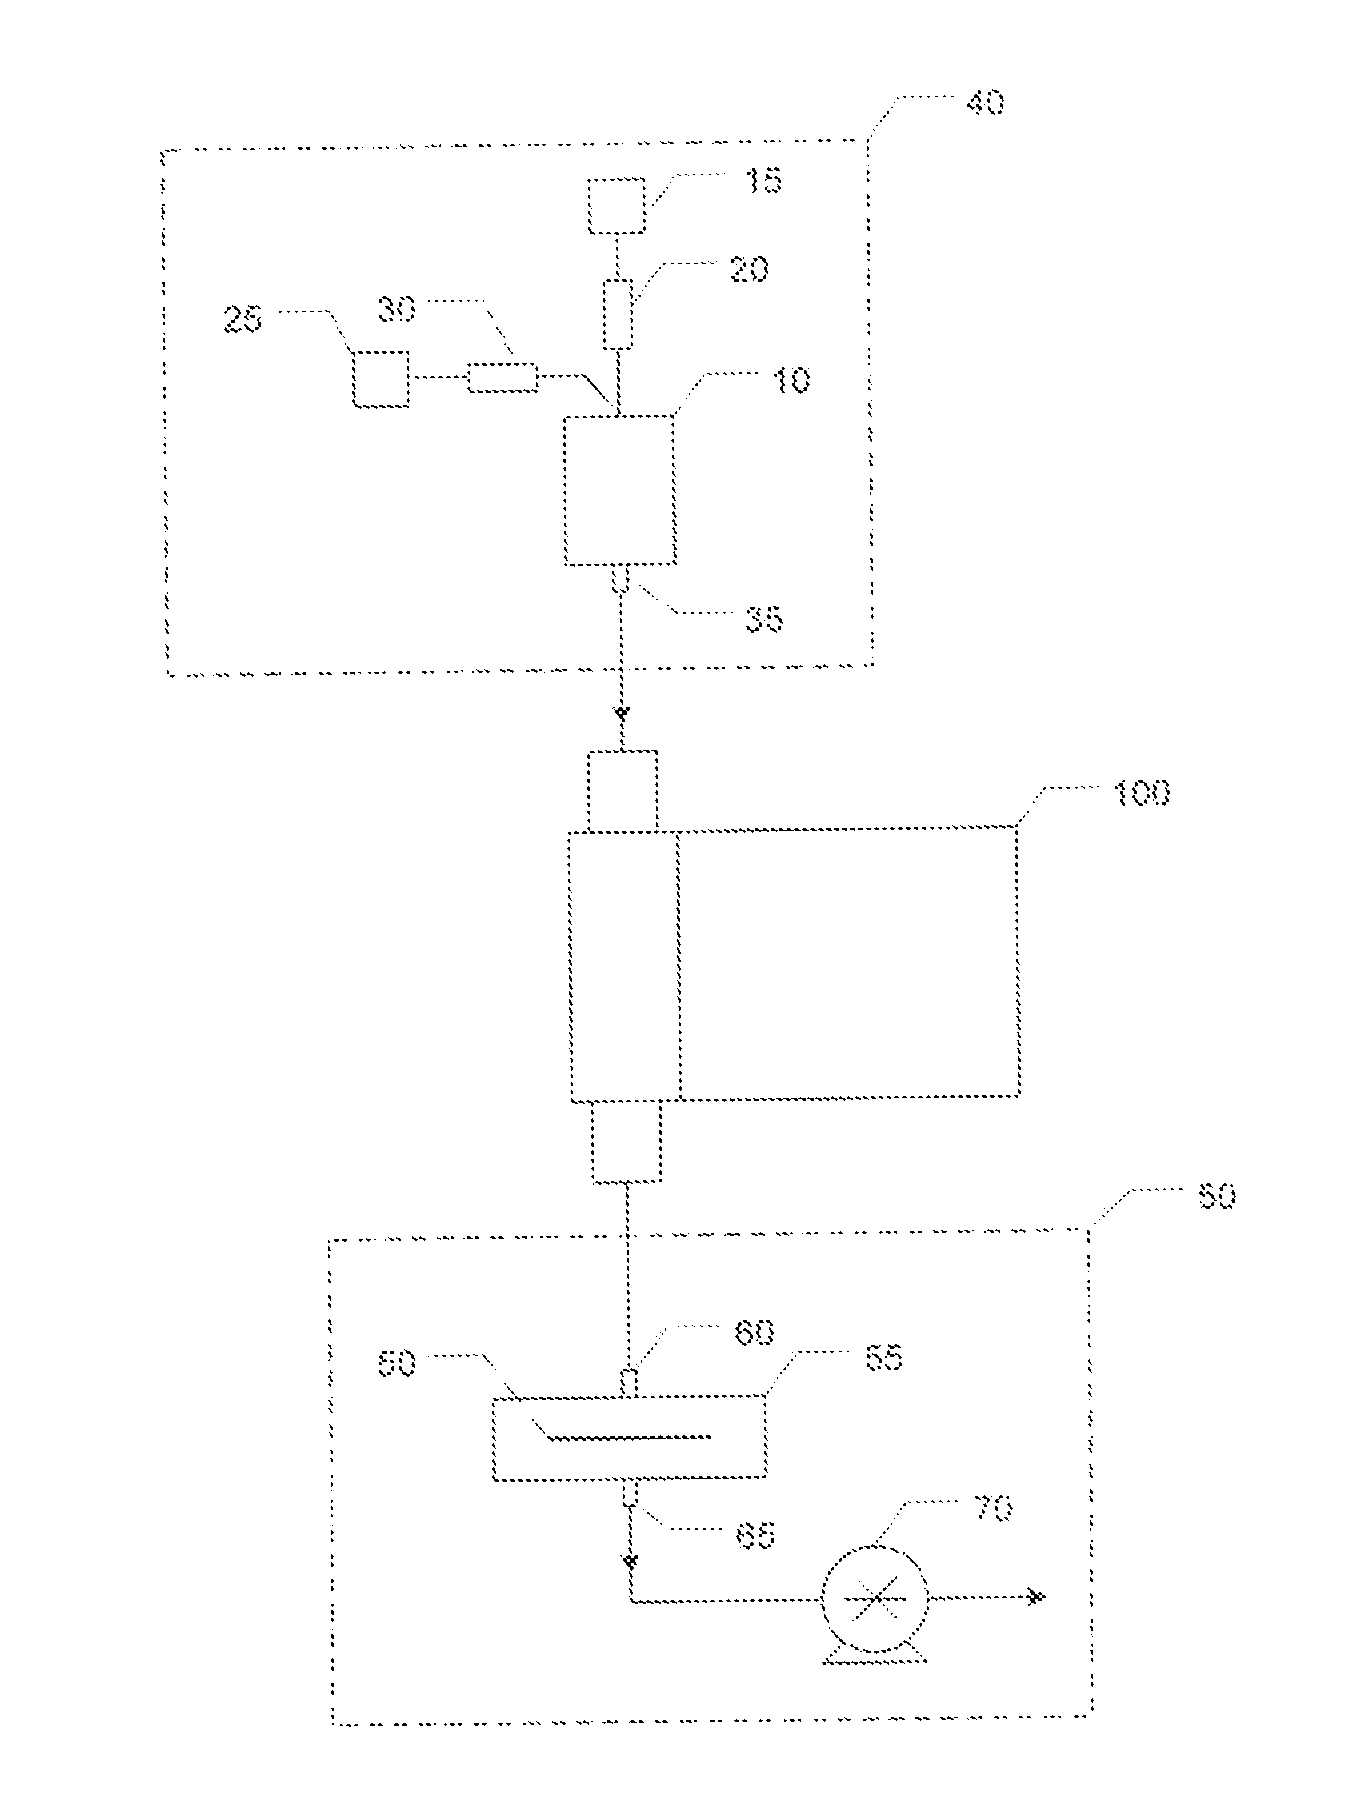 Apparatus for filtration and gas-vapor mixing in thin film deposition